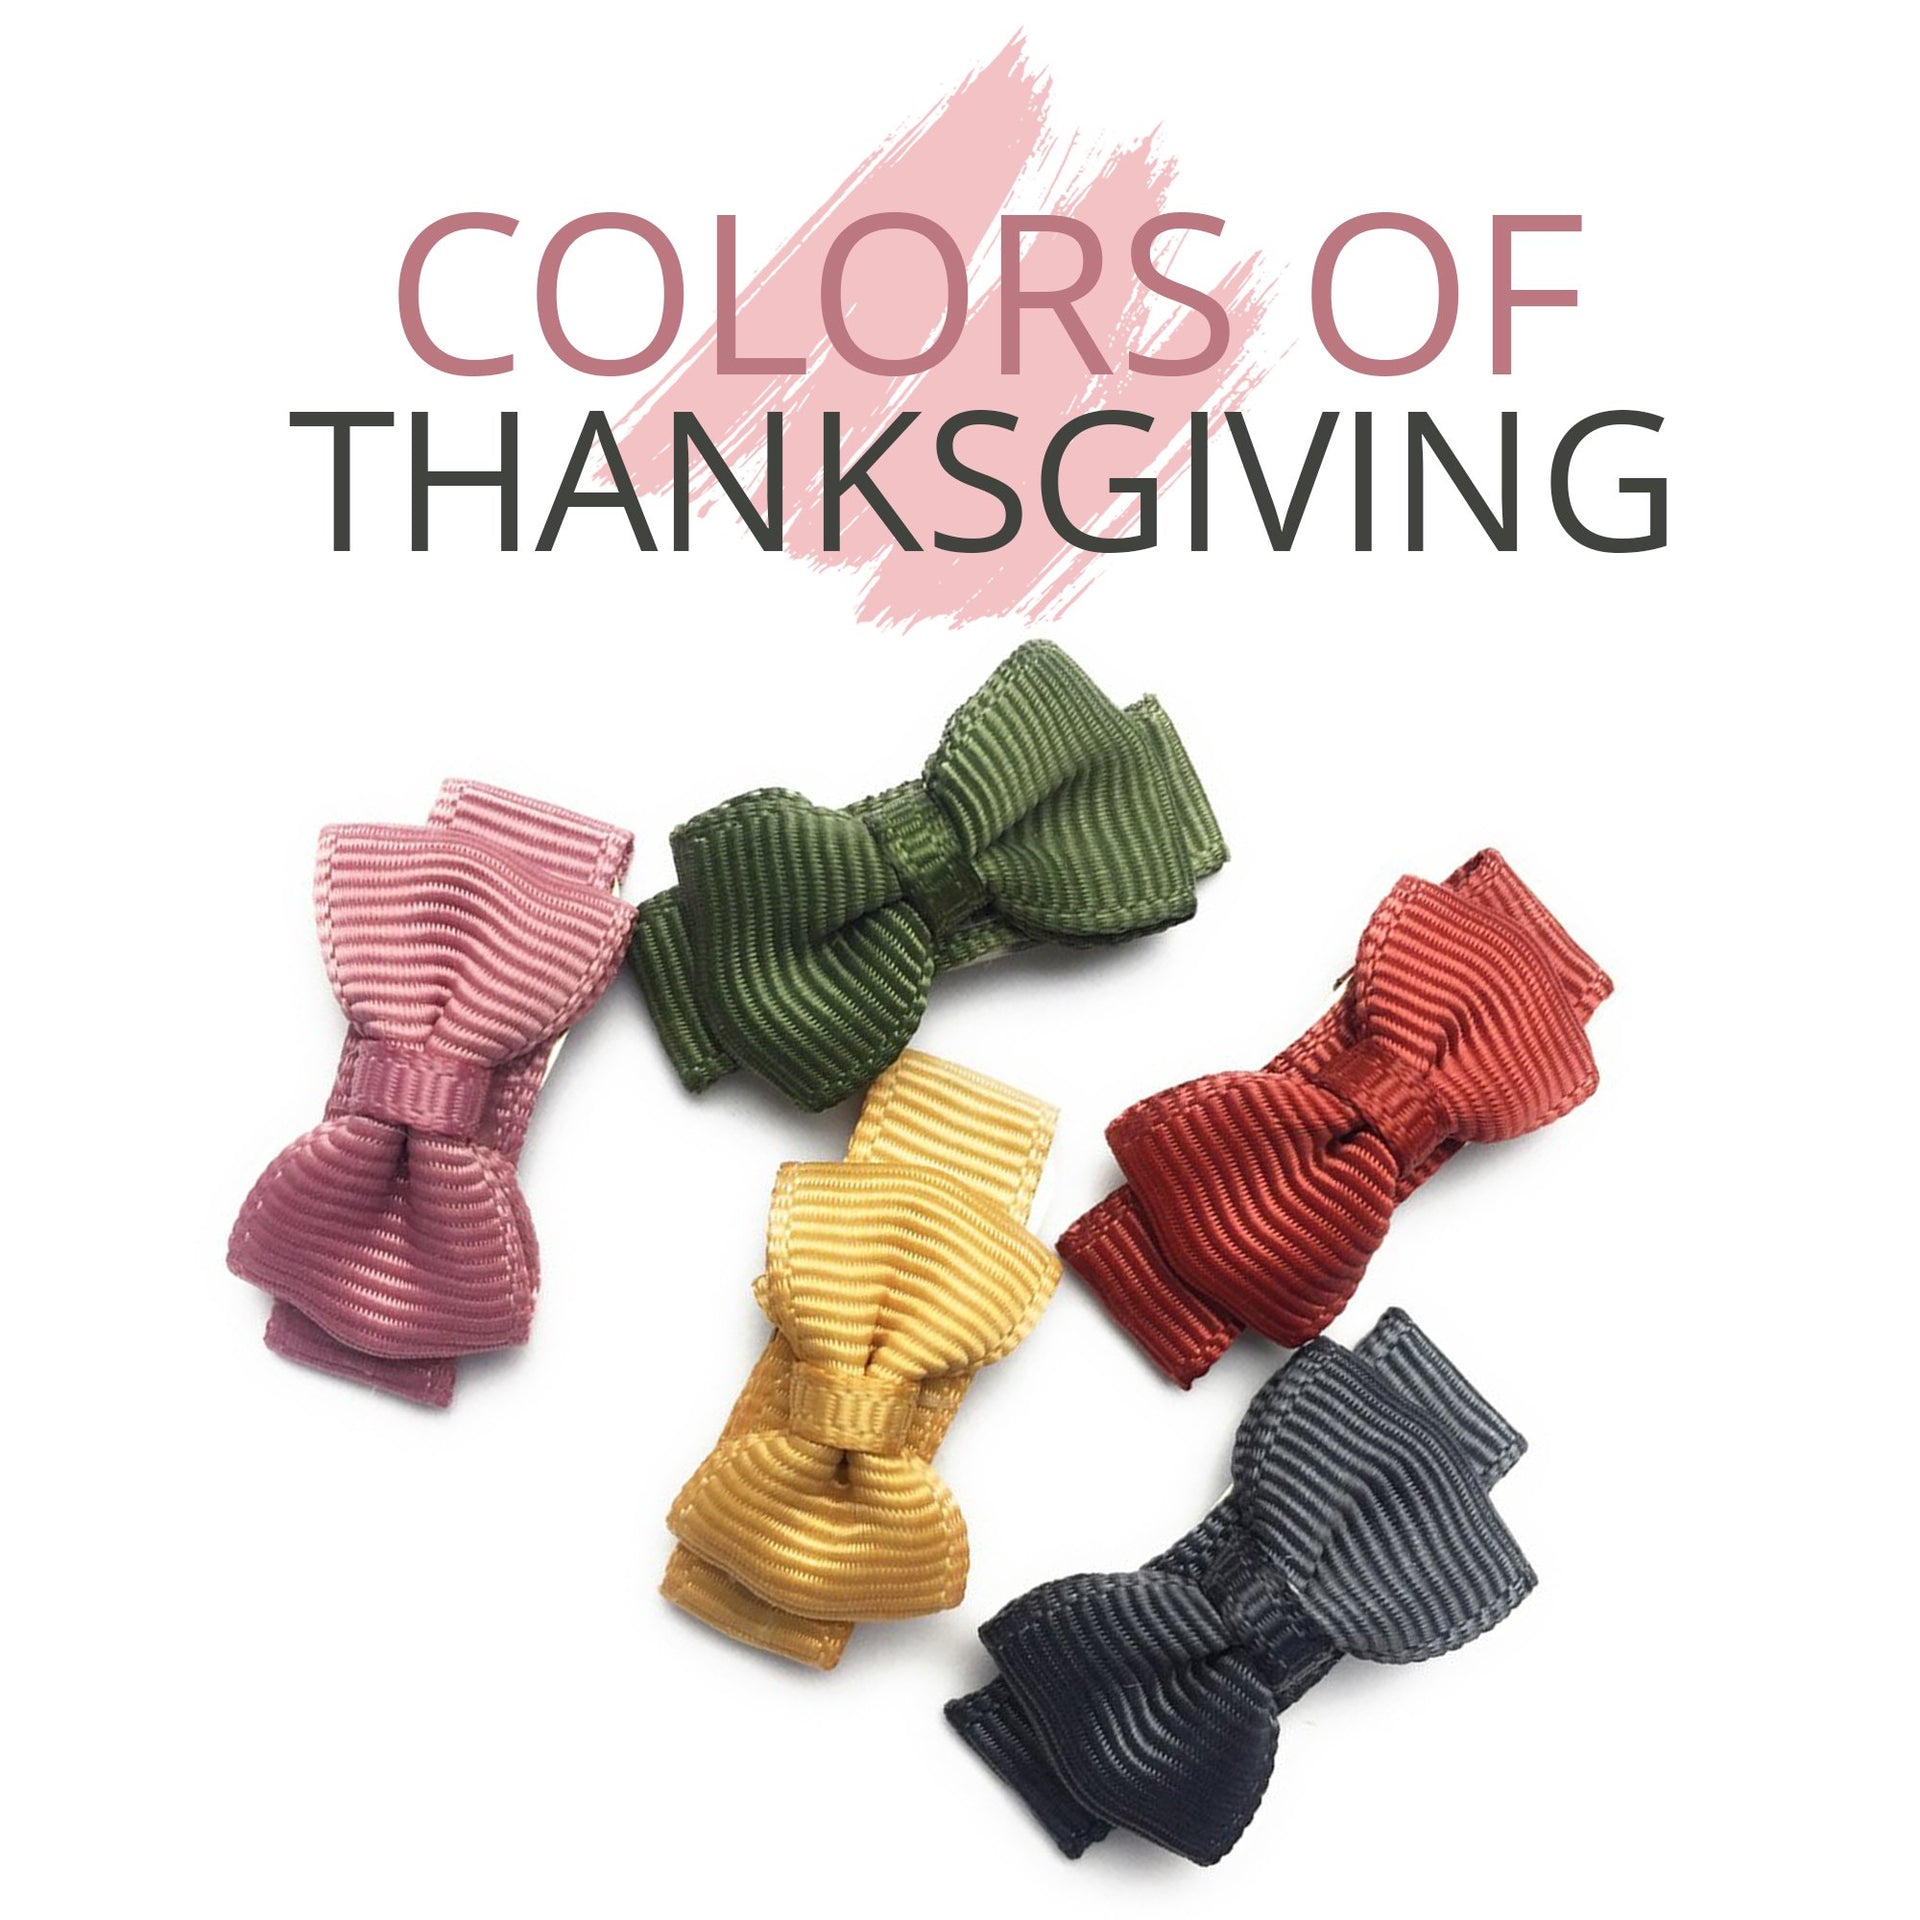 Thanksgiving color ideas to try this Holiday